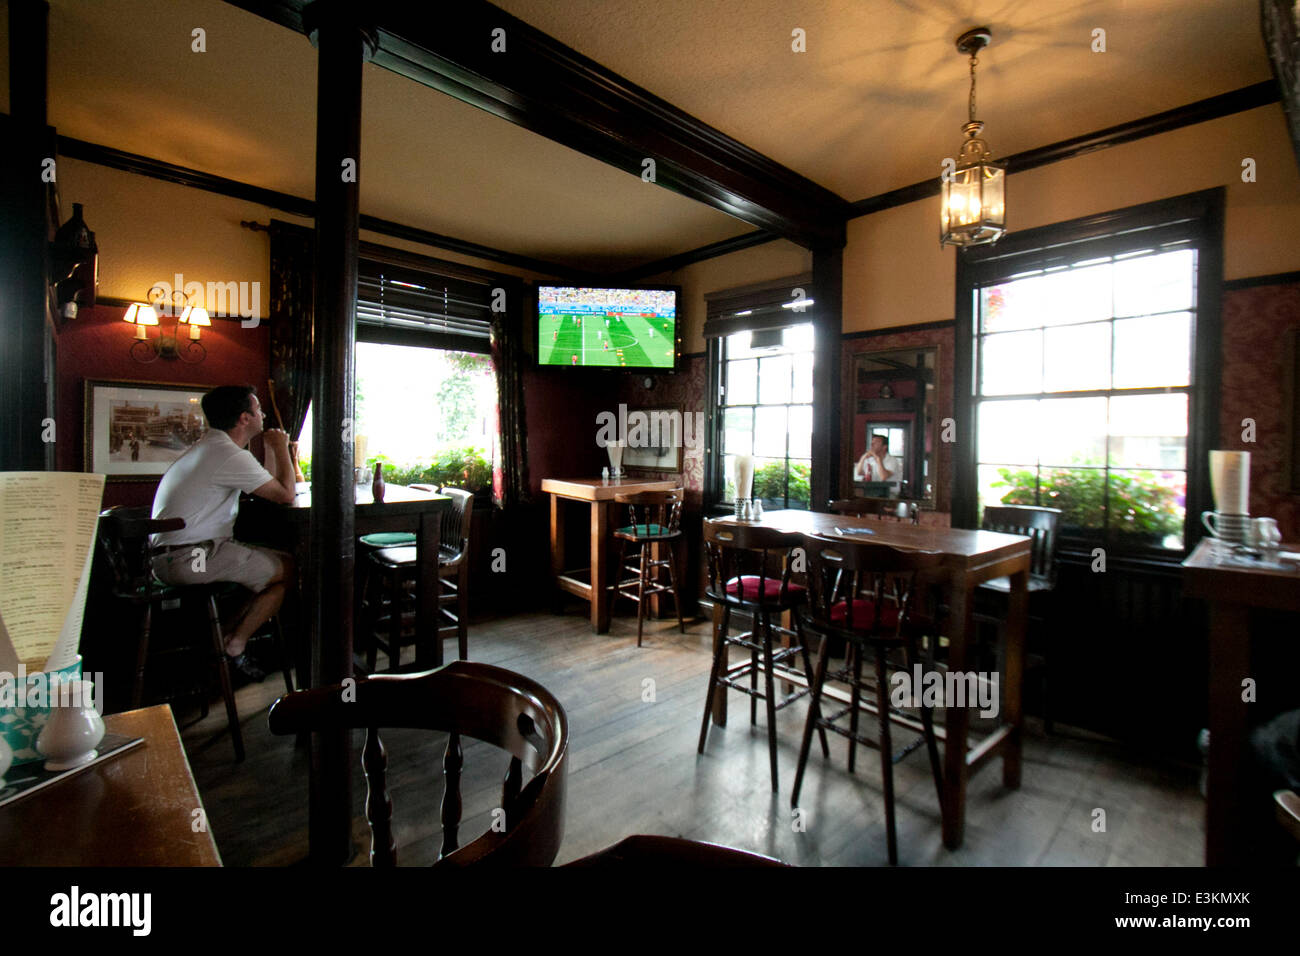 Wimbledon, London, UK. 24th June 2014. The England v Costa Rica world cup match  is televised in an empty  pub after England was eliminated from the 2014 World Cup in Brazil Credit:  amer ghazzal/Alamy Live News Stock Photo